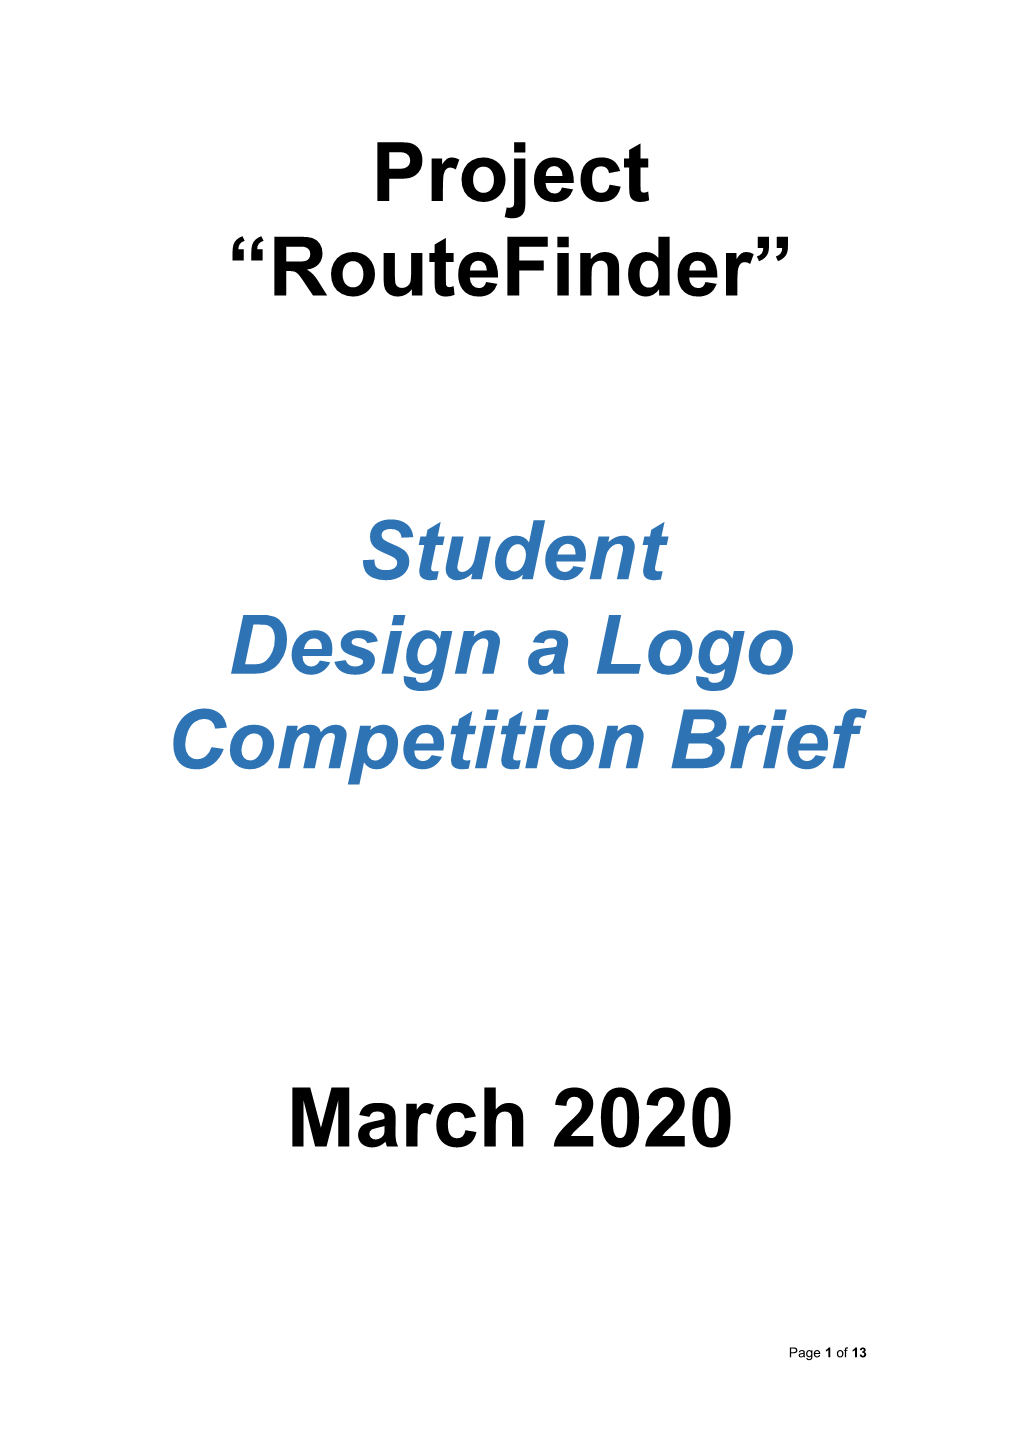 Project “Routefinder” Student Design a Logo Competition